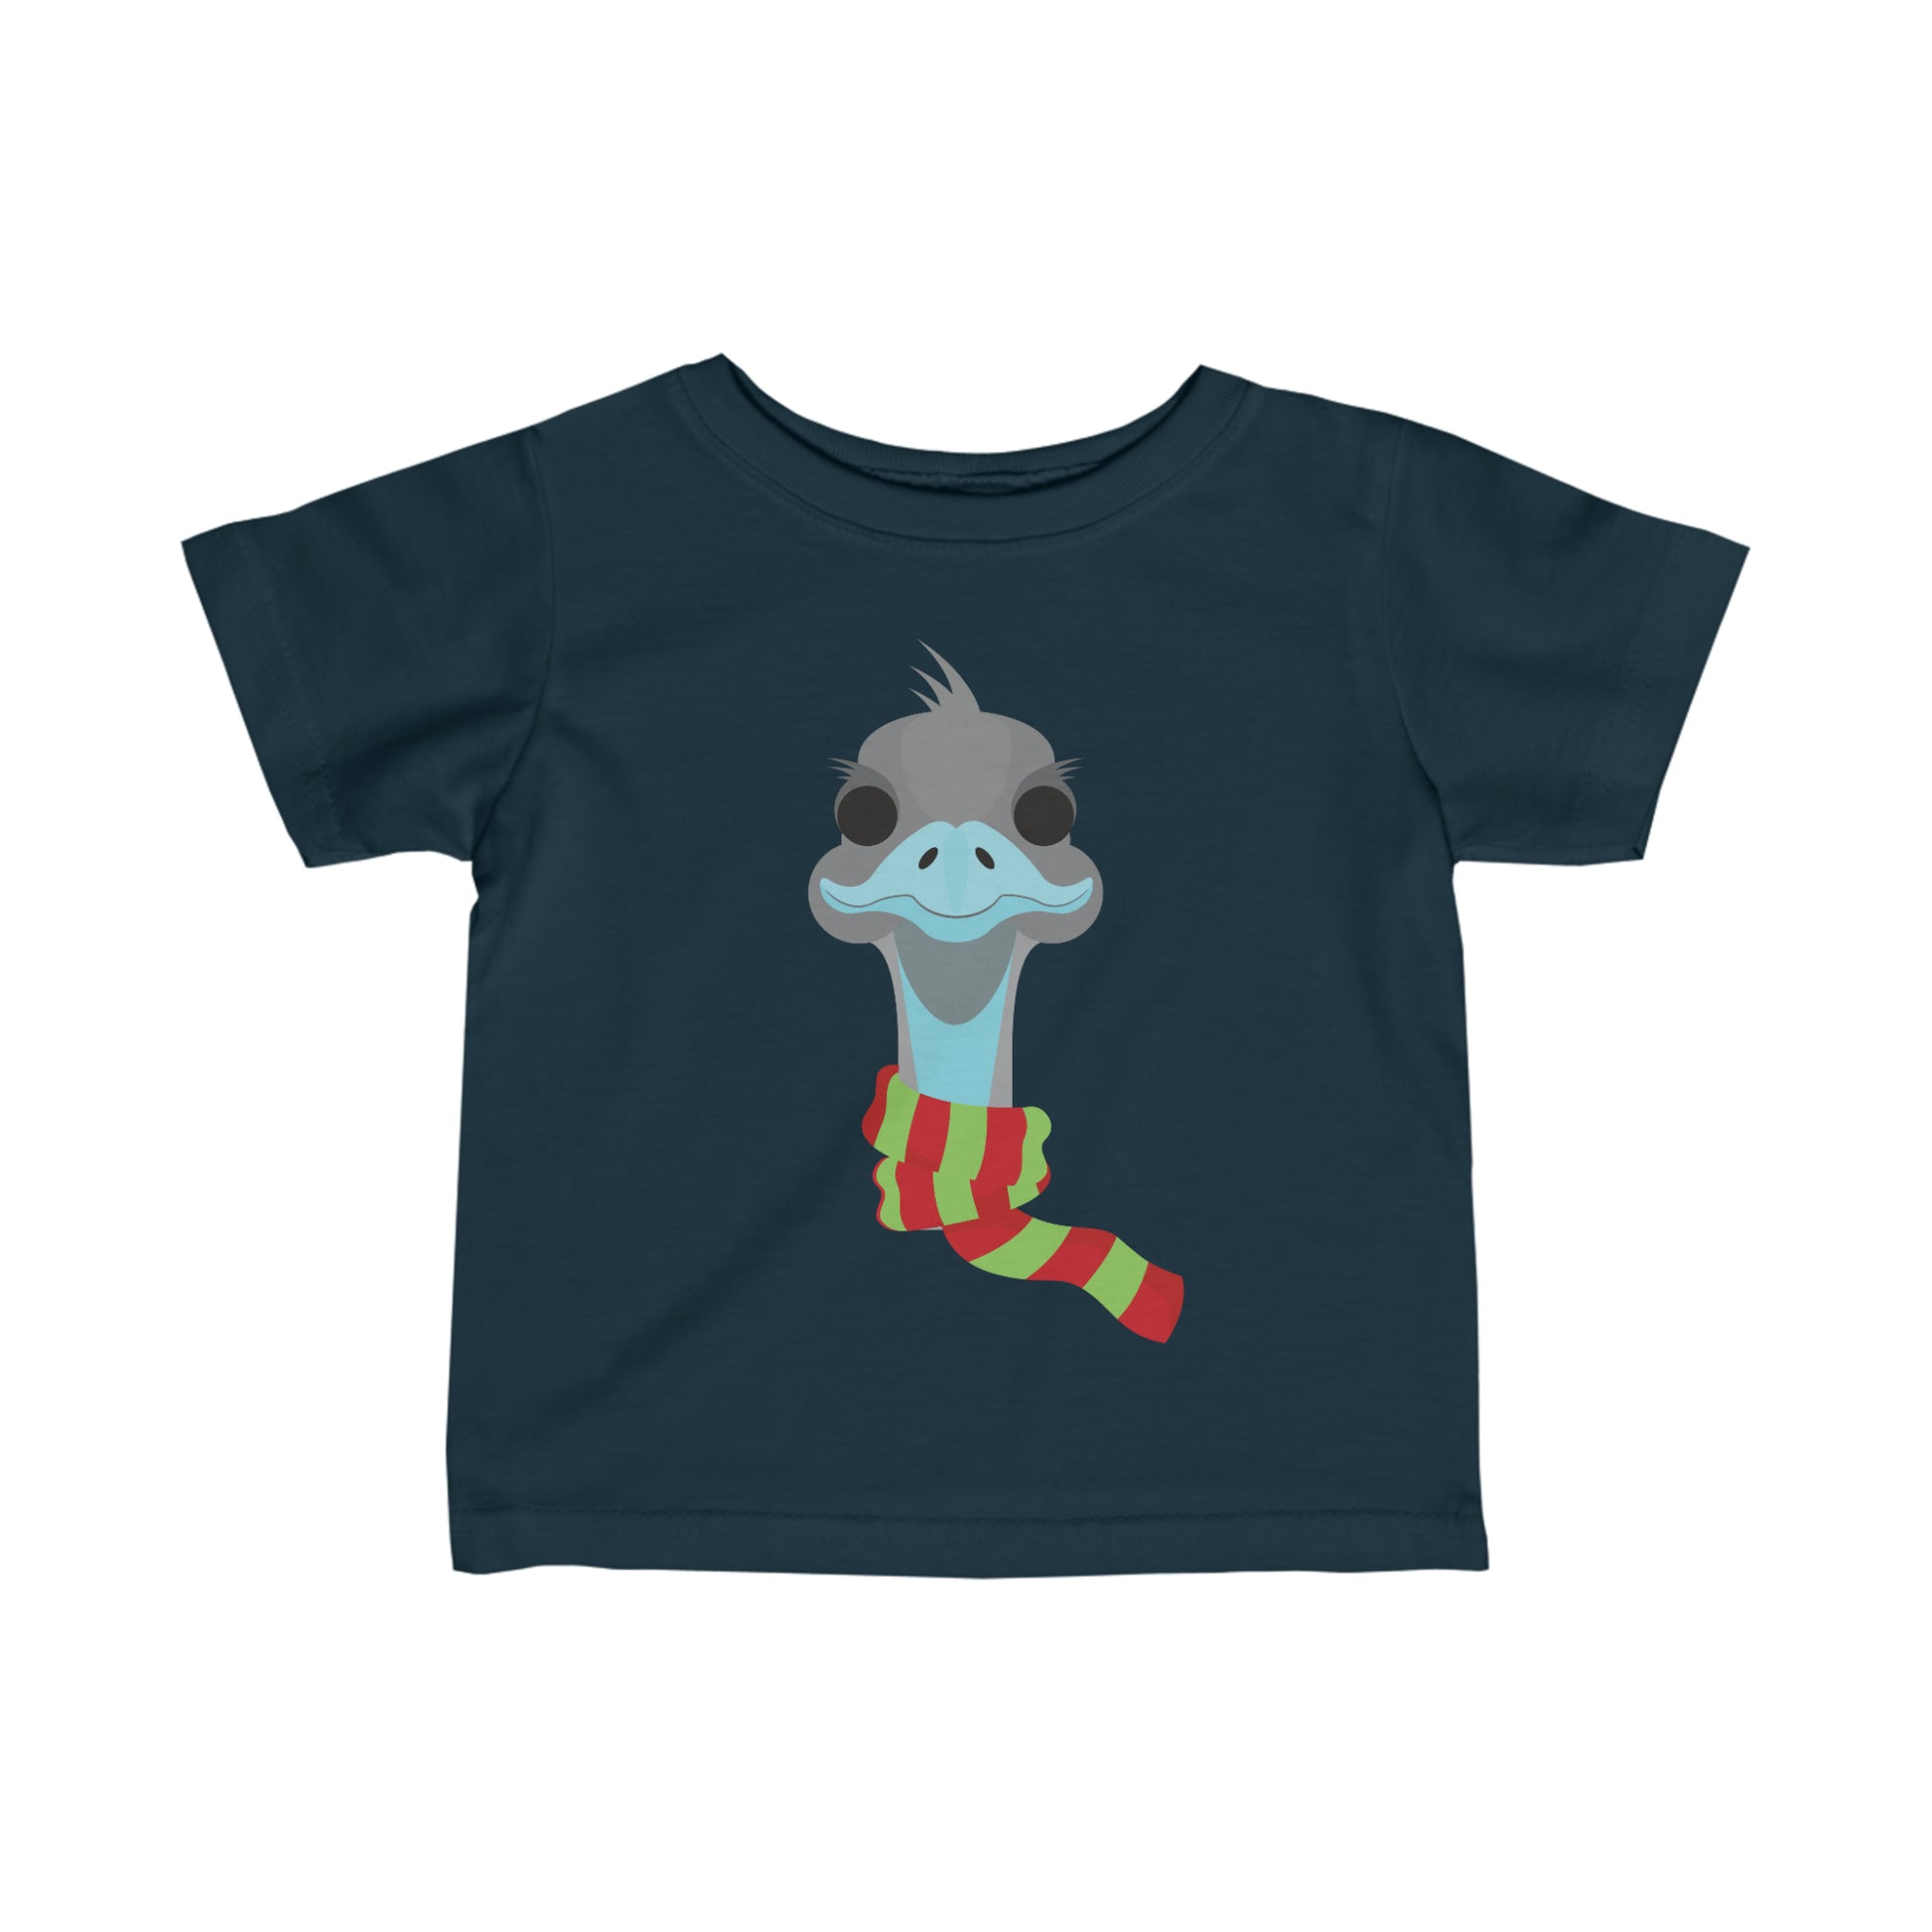 dark navy blue emu Christmas t-shirt for kids. Featuring an emu adorned in a vibrant red and green Christmas scarf